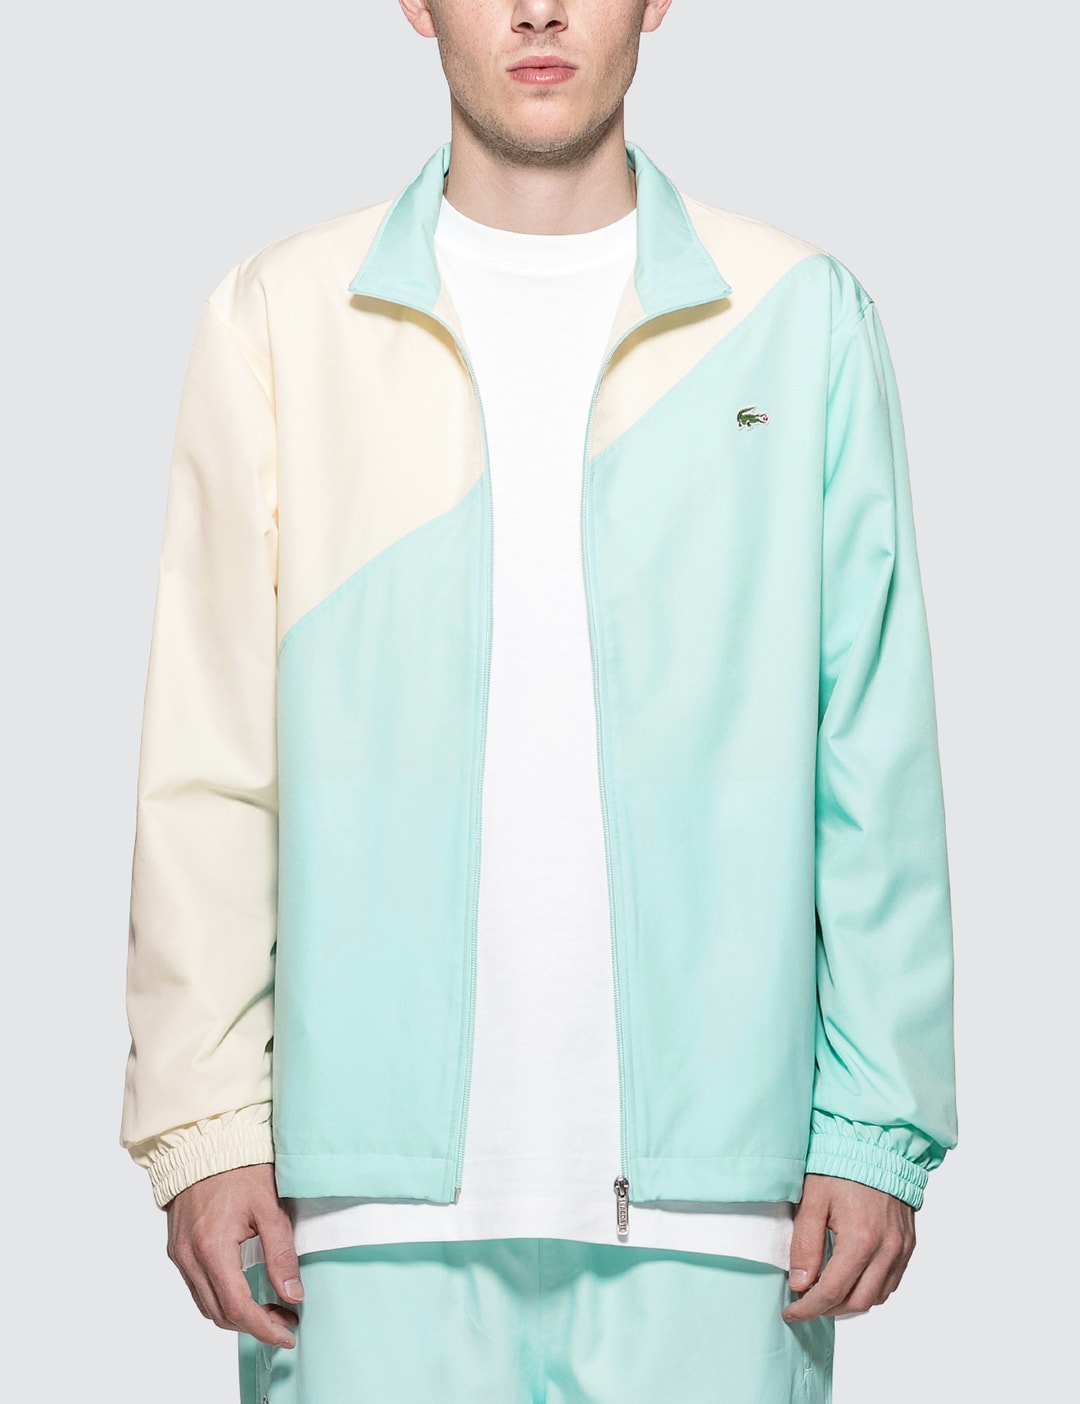 Relative output rescue Lacoste - GOLF le FLEUR* x Lacoste Colorblock Track Jacket | HBX - Globally  Curated Fashion and Lifestyle by Hypebeast